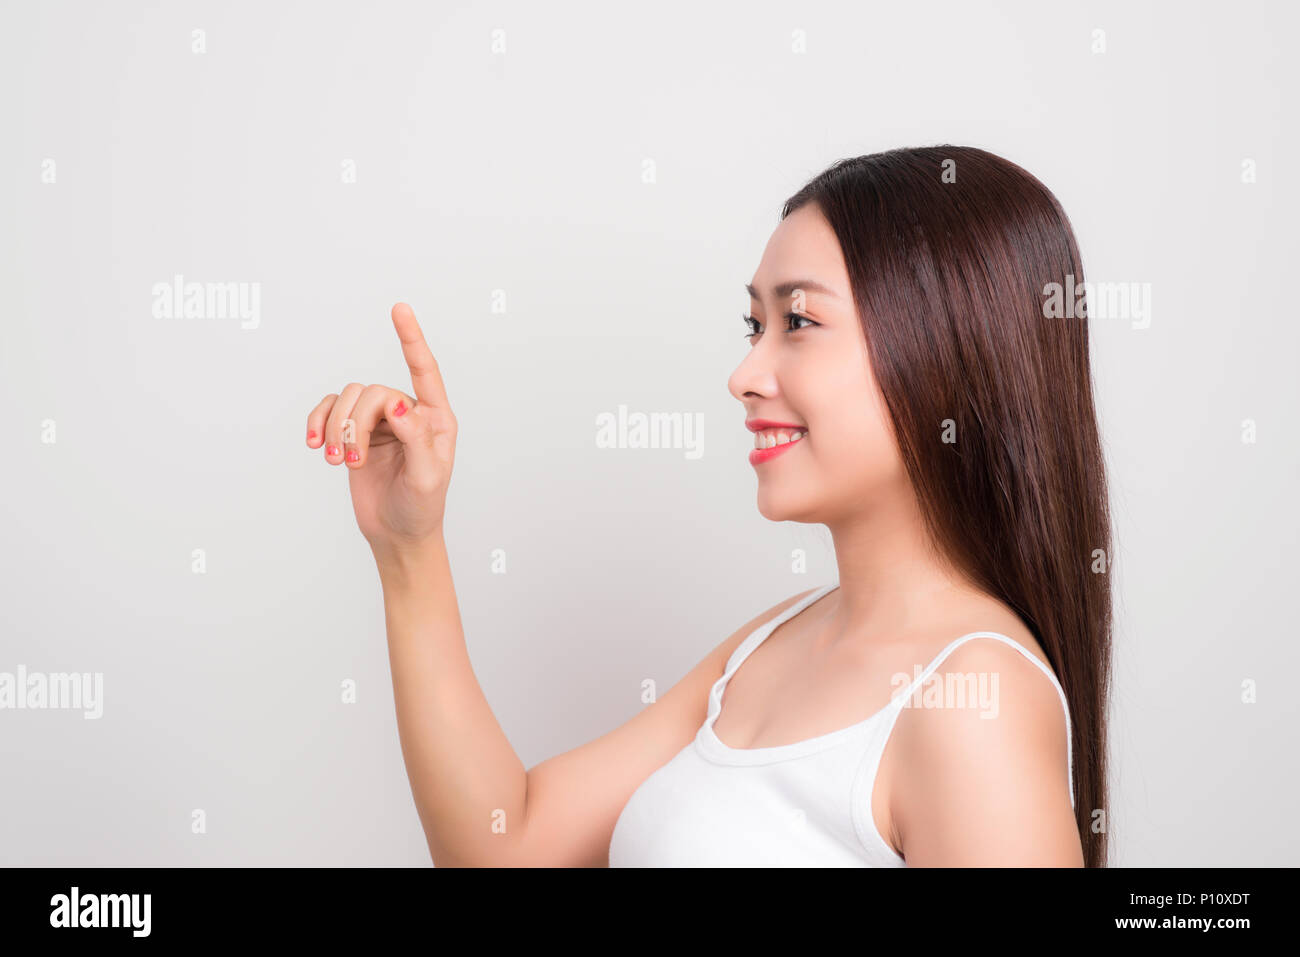 Beauty Woman with perfect makeup Portrait. Touching screen. Gestures for advertisemen Stock Photo